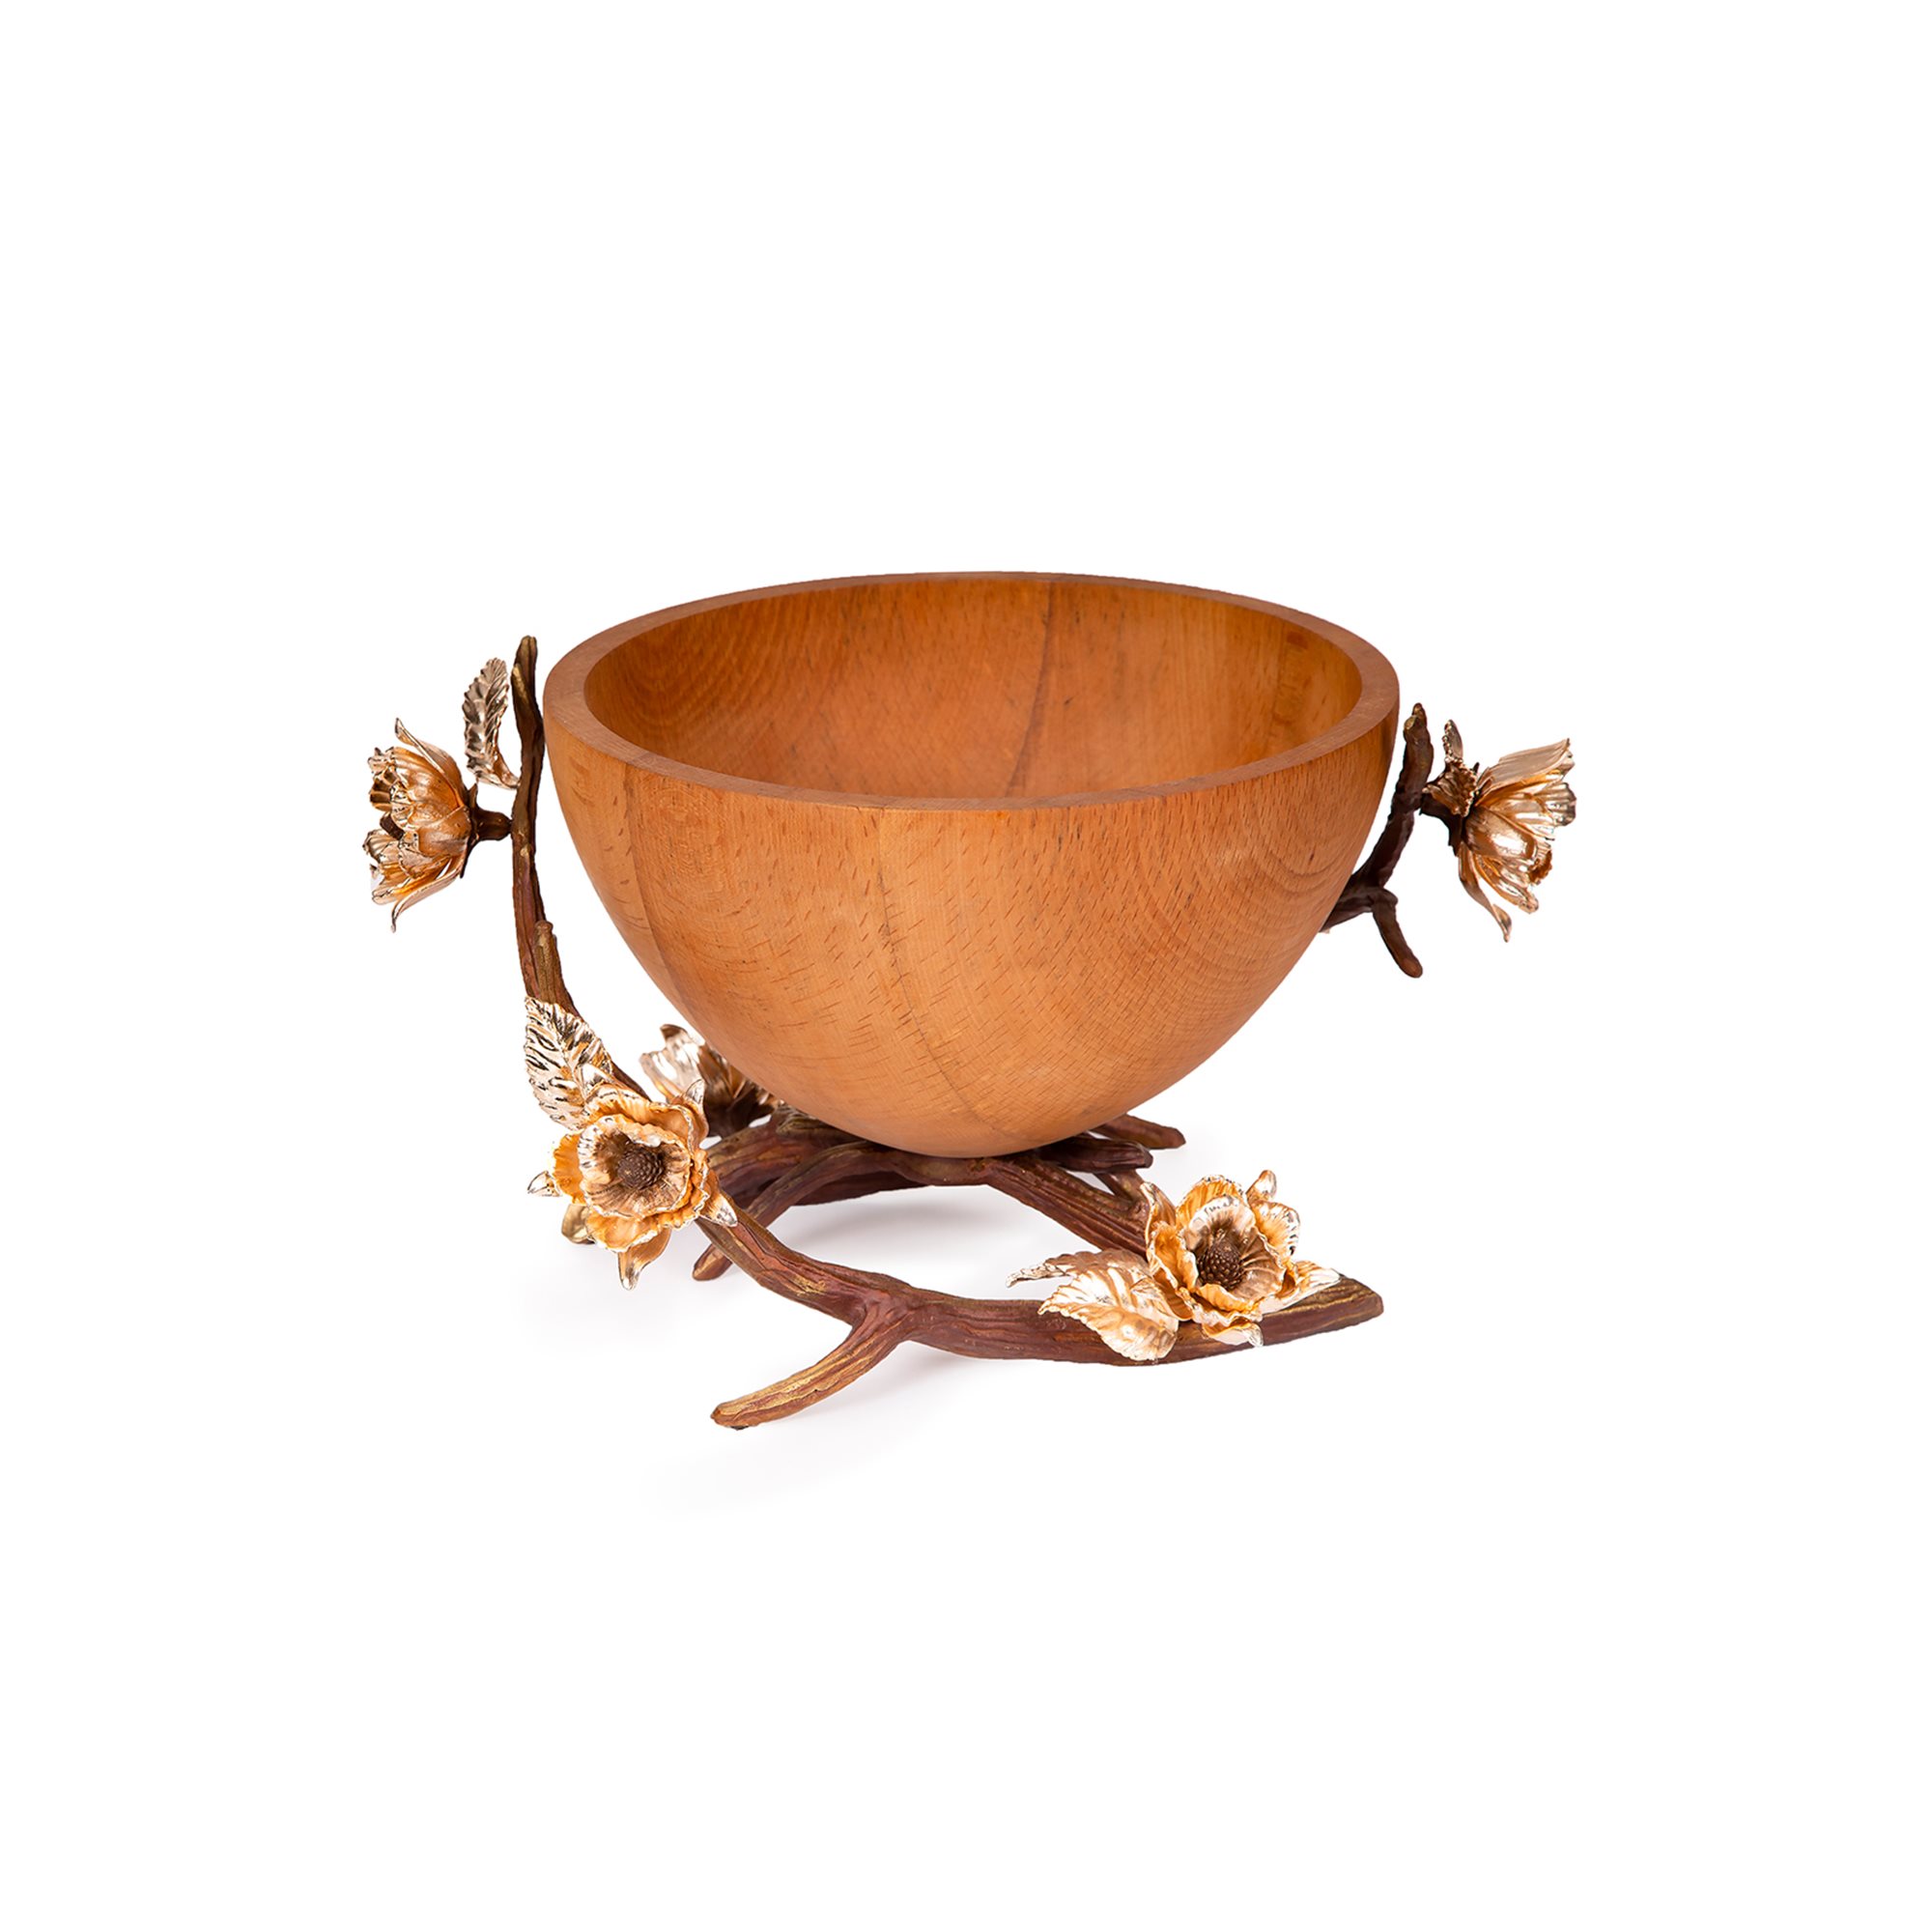 Anika Wood Serving Bowl - Double Branches (Size B3)